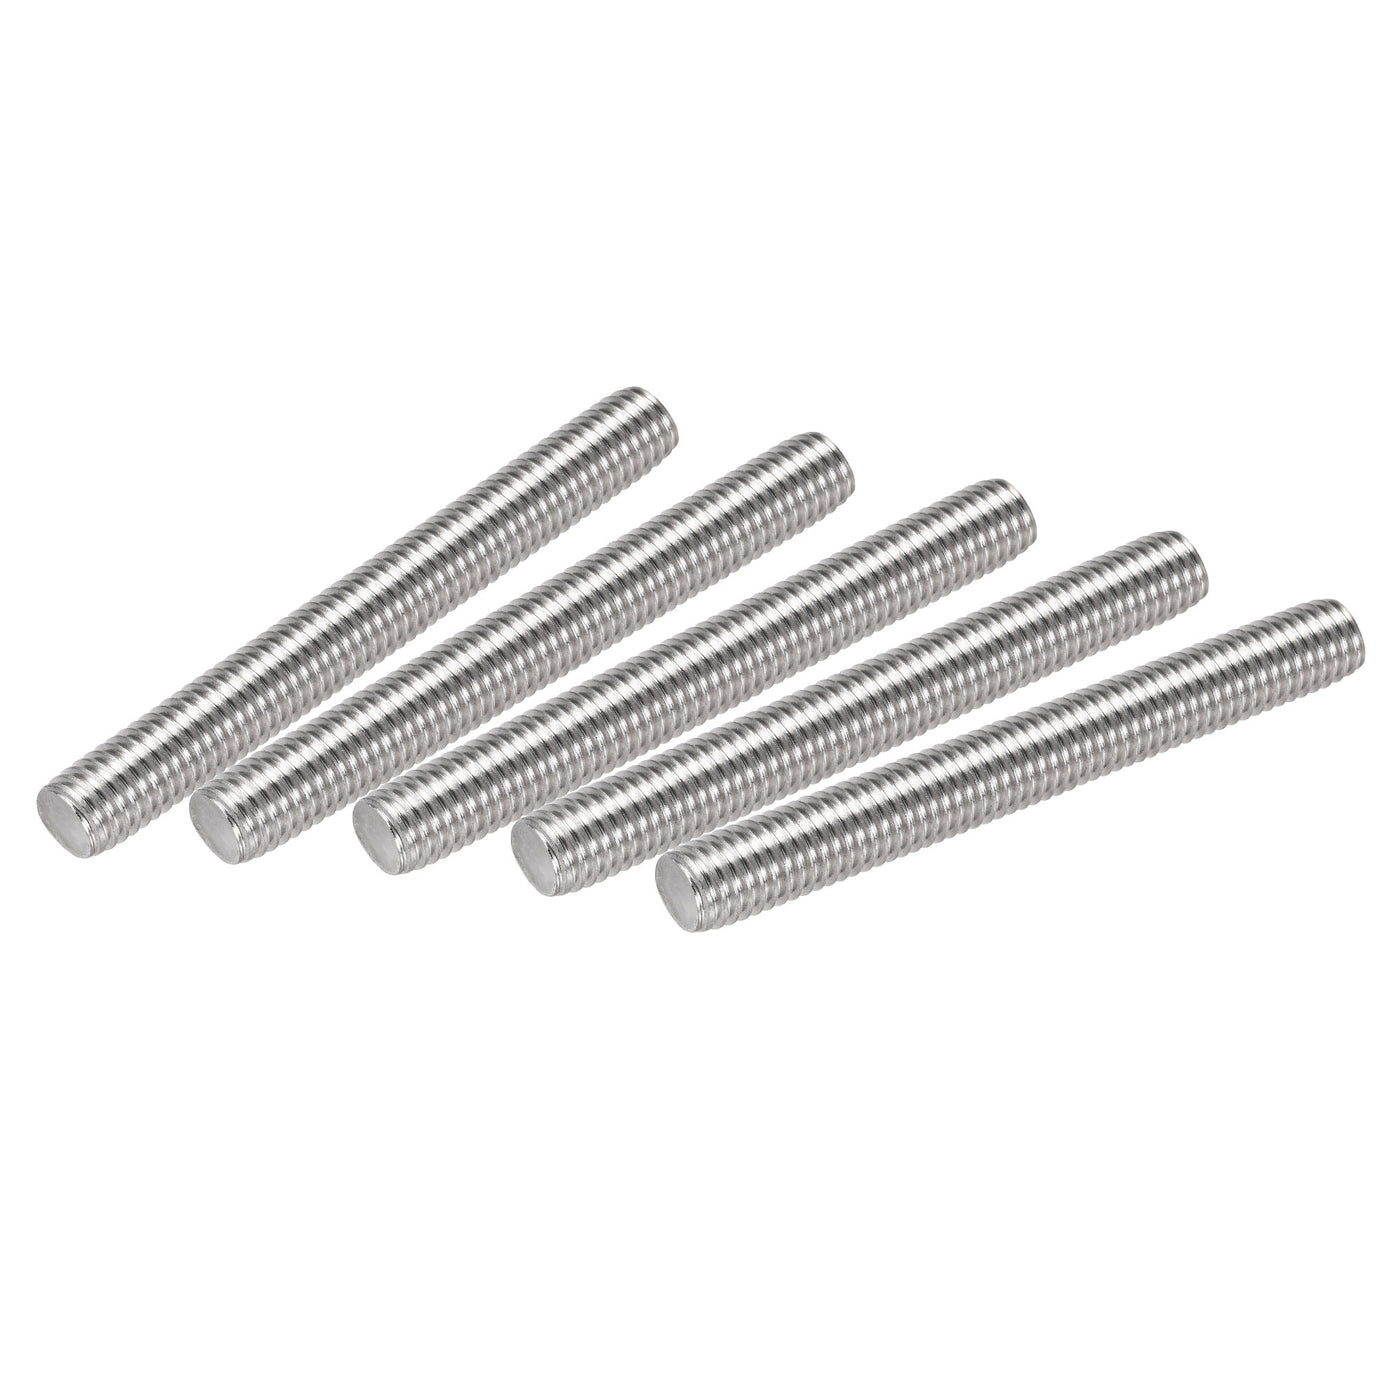 uxcell Uxcell 5pcs M10 x 80mm Fully Threaded Rod 304 Stainless Steel Right Hand 1.5mm Pitch